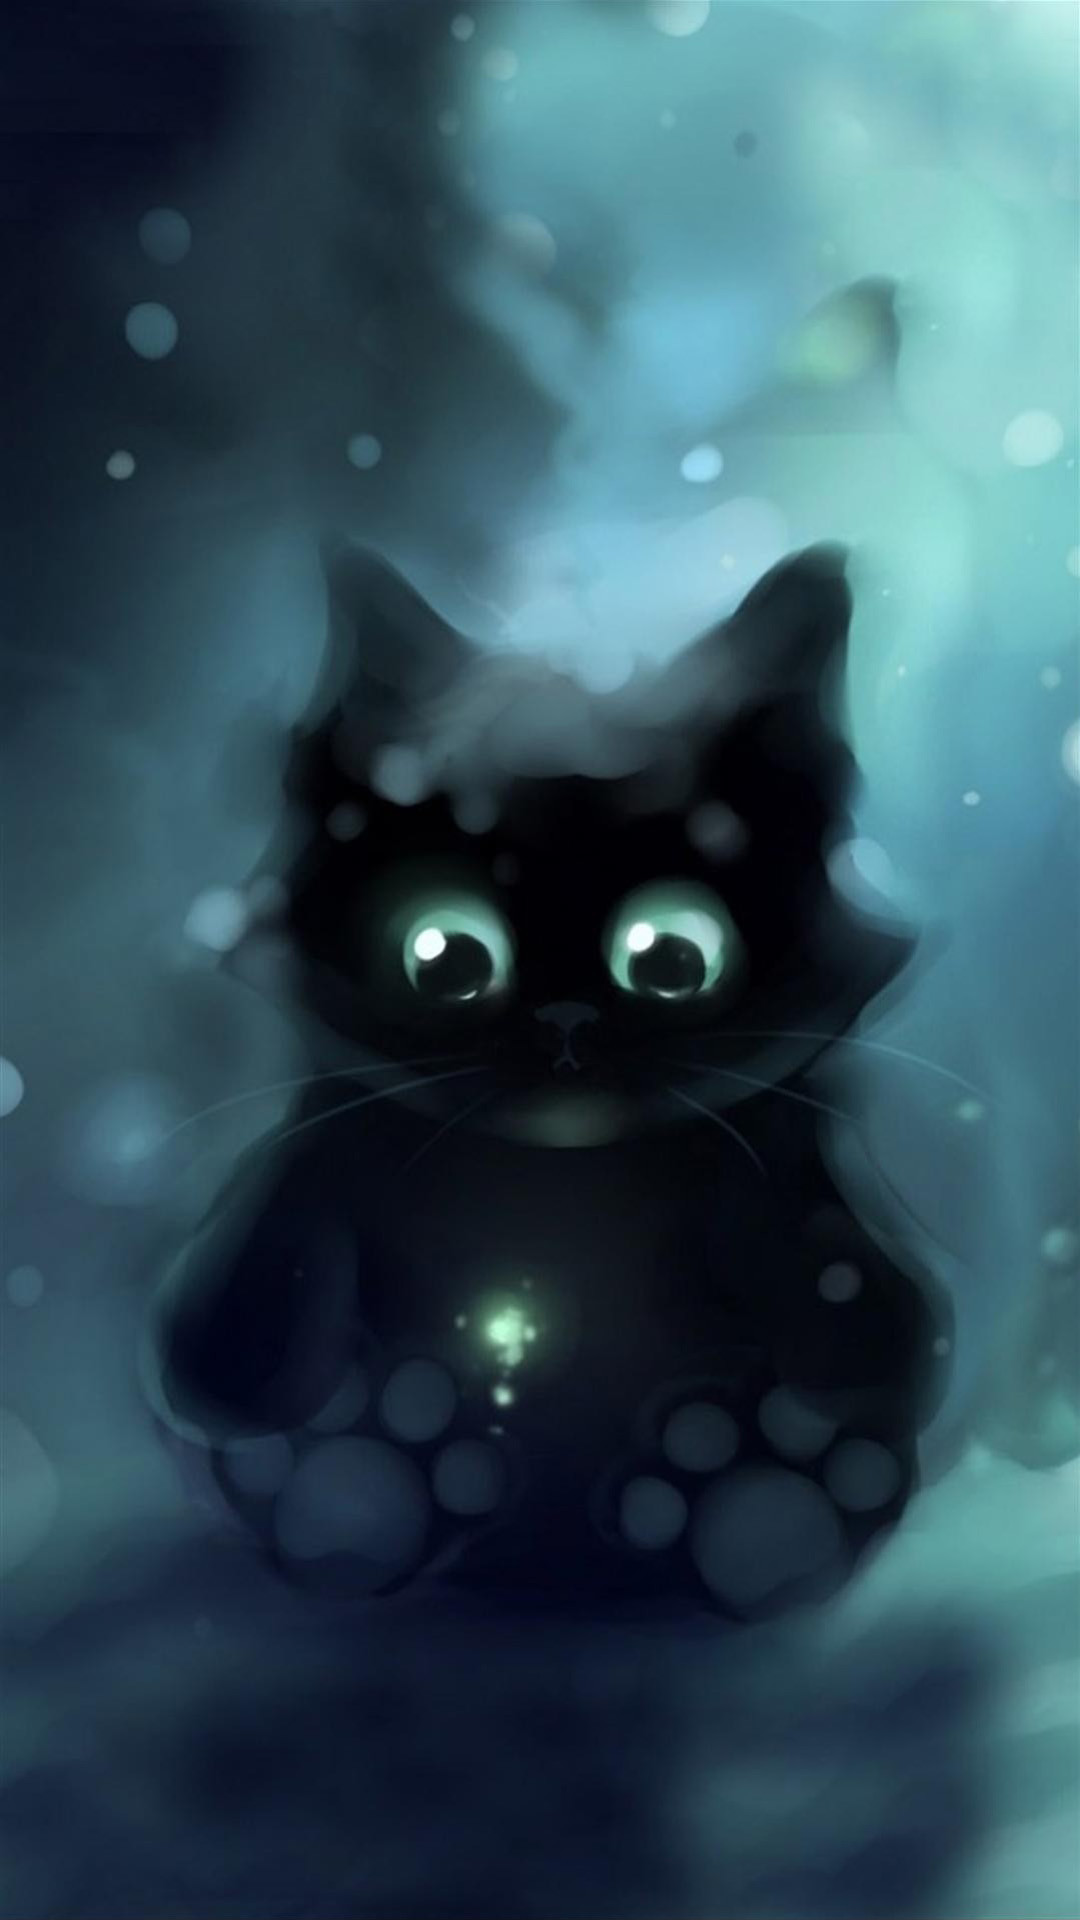 1080x1920 Black Cat Galaxy Note 3 Wallpapers Galaxy Note 3 Wallpapers